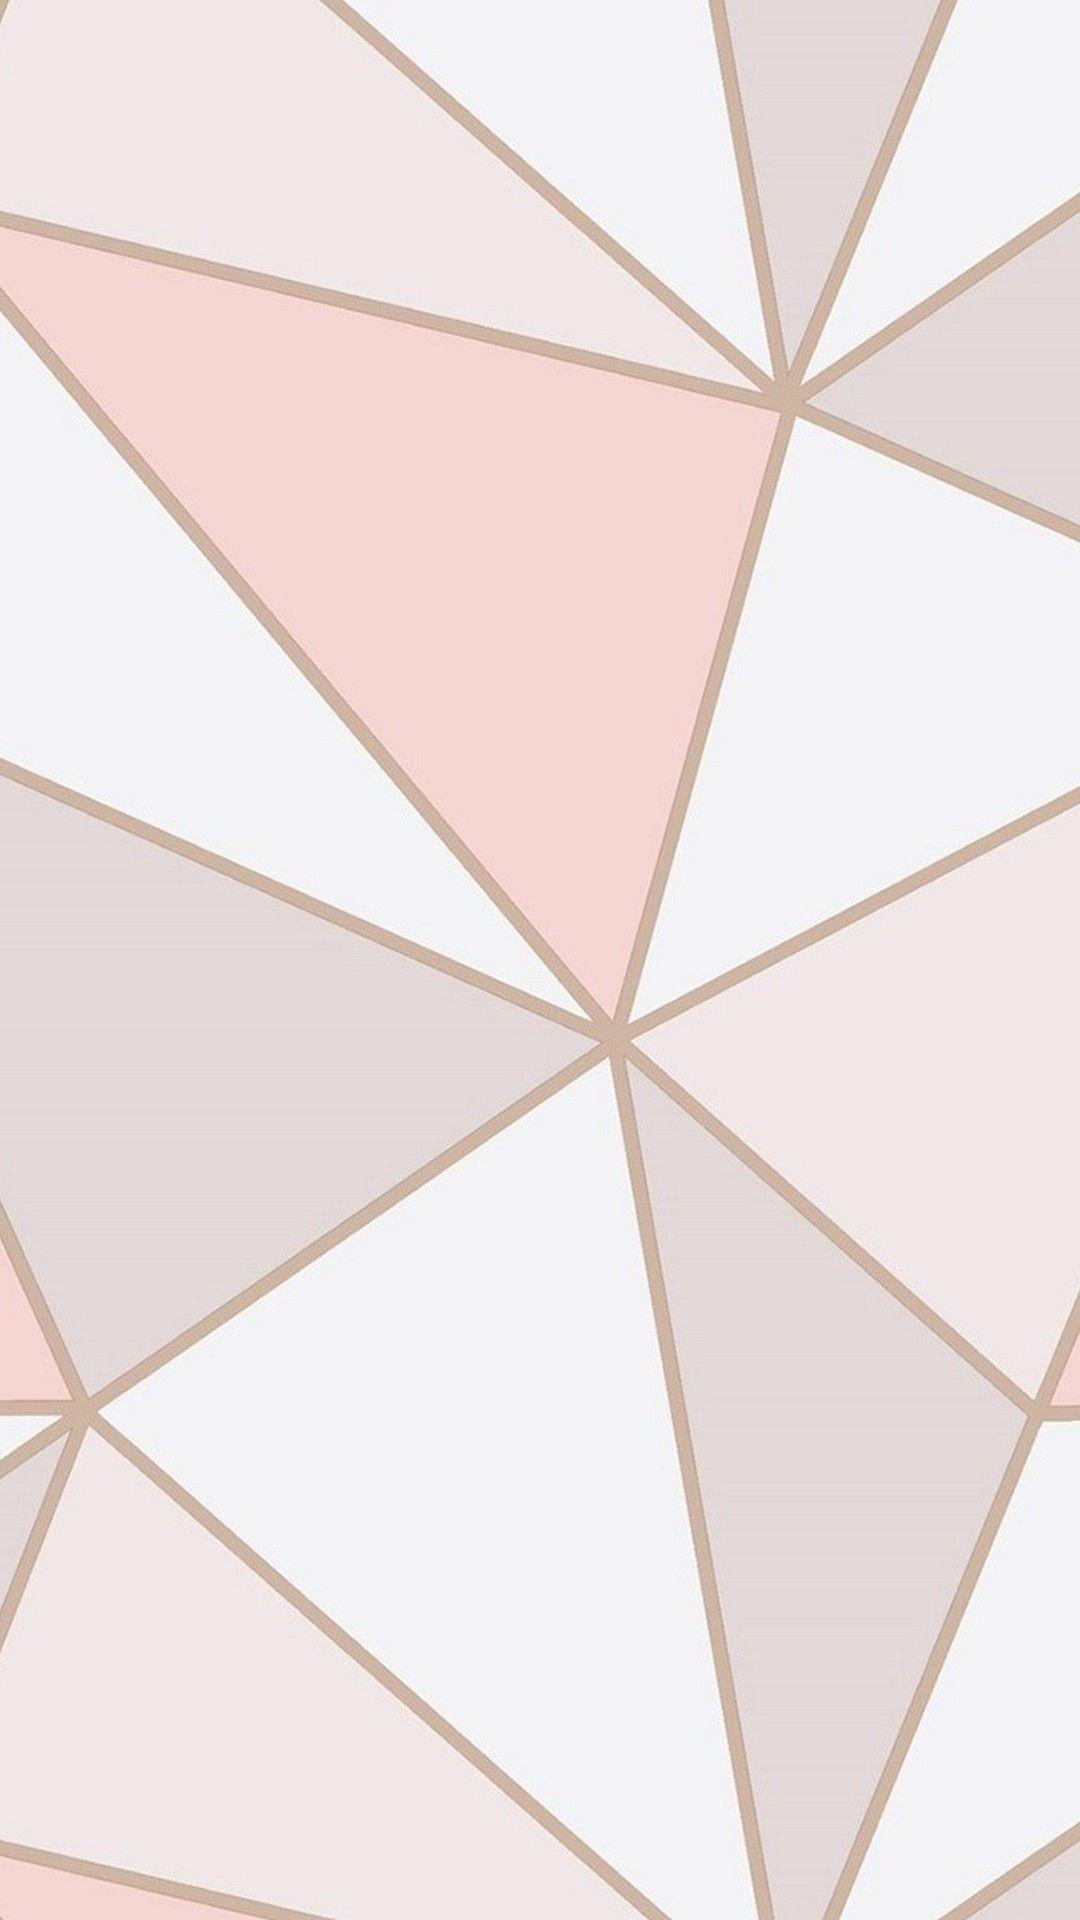 Rose Gold Teenage Cool Backgrounds For Iphone